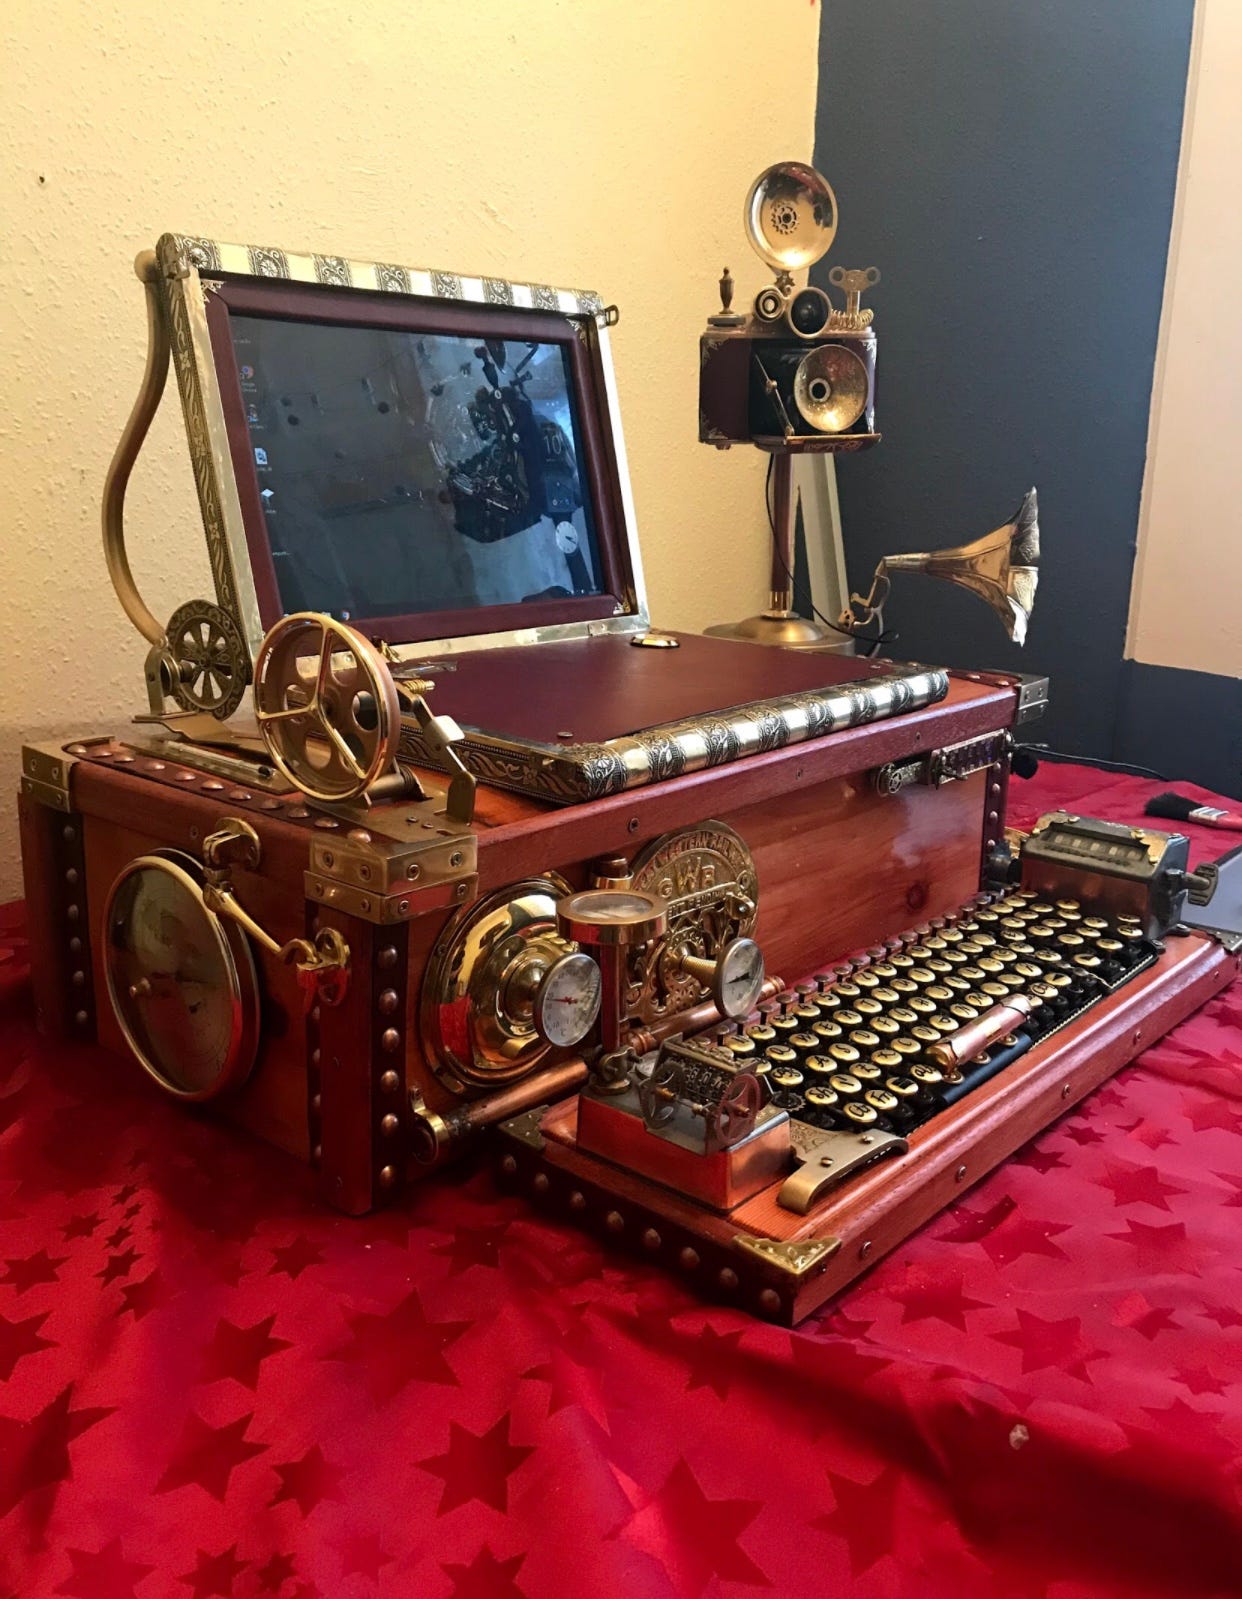 File:Victorian Style Steampunk Computer.jpg - Wikimedia Commons